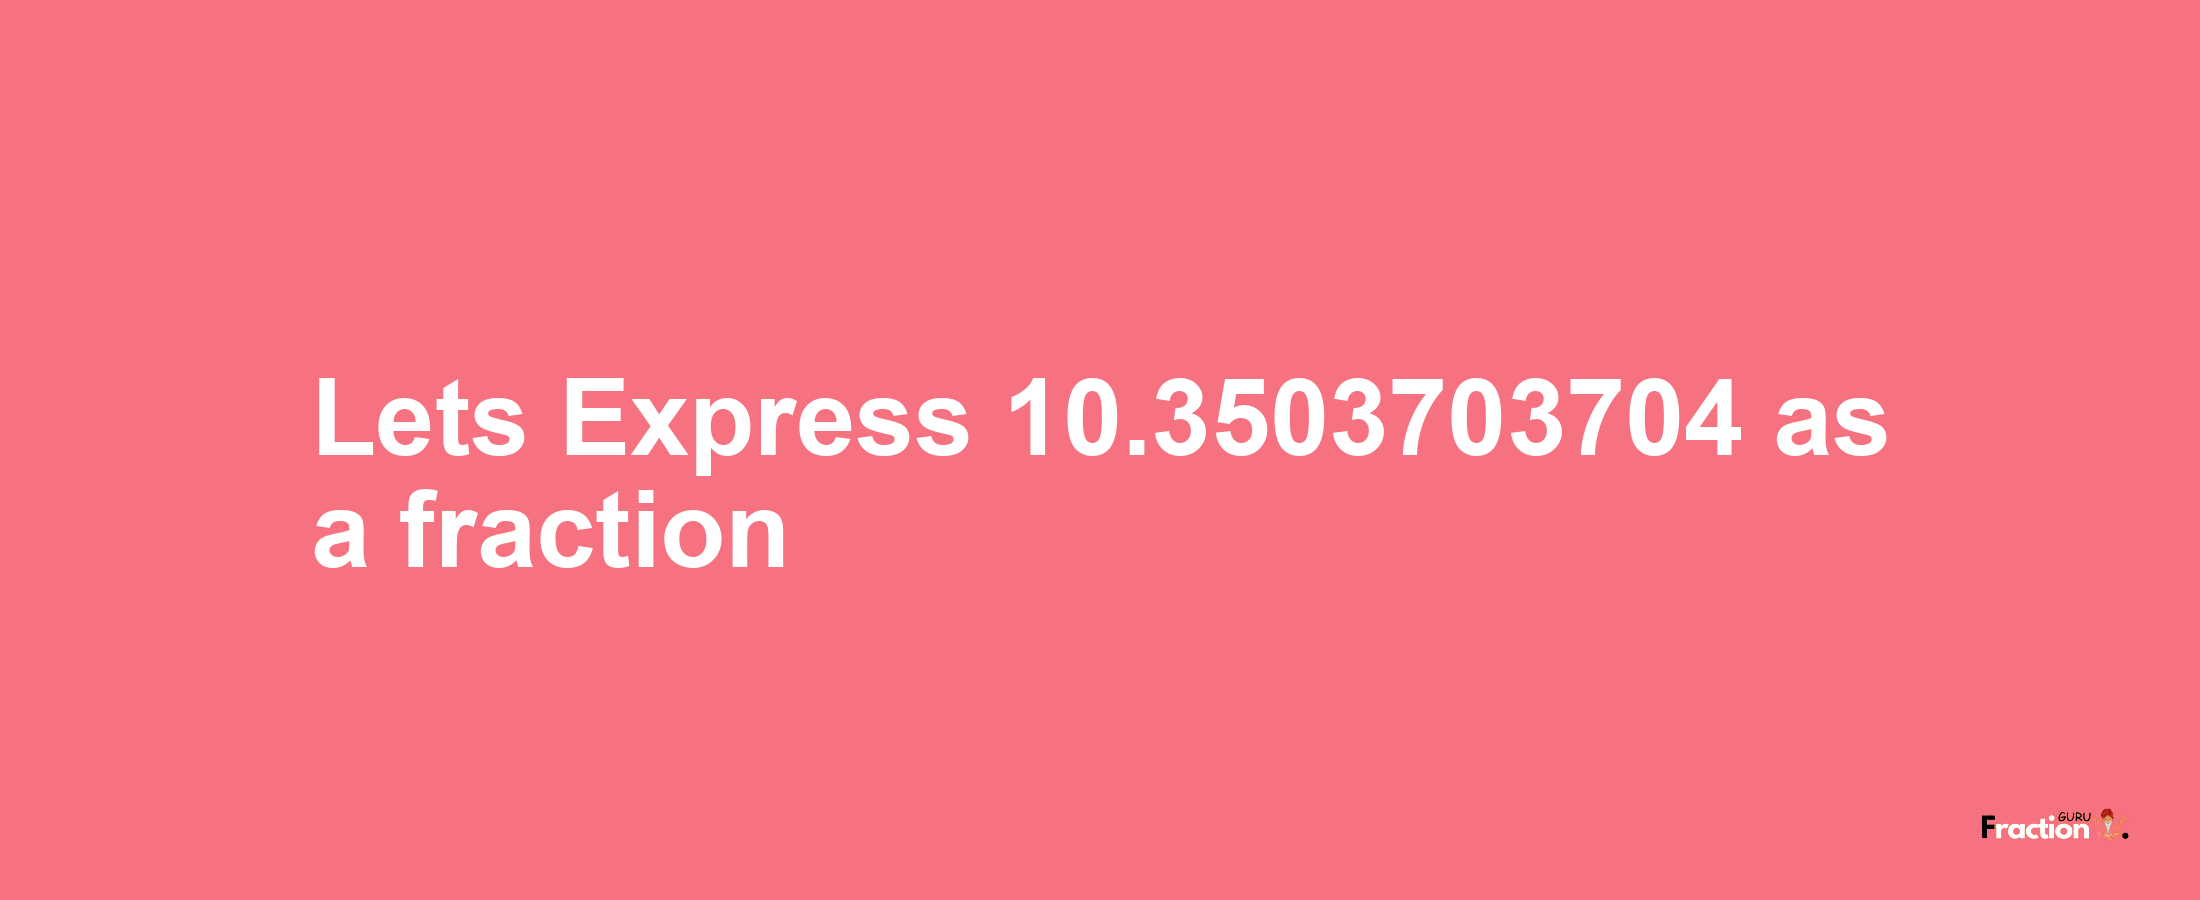 Lets Express 10.3503703704 as afraction